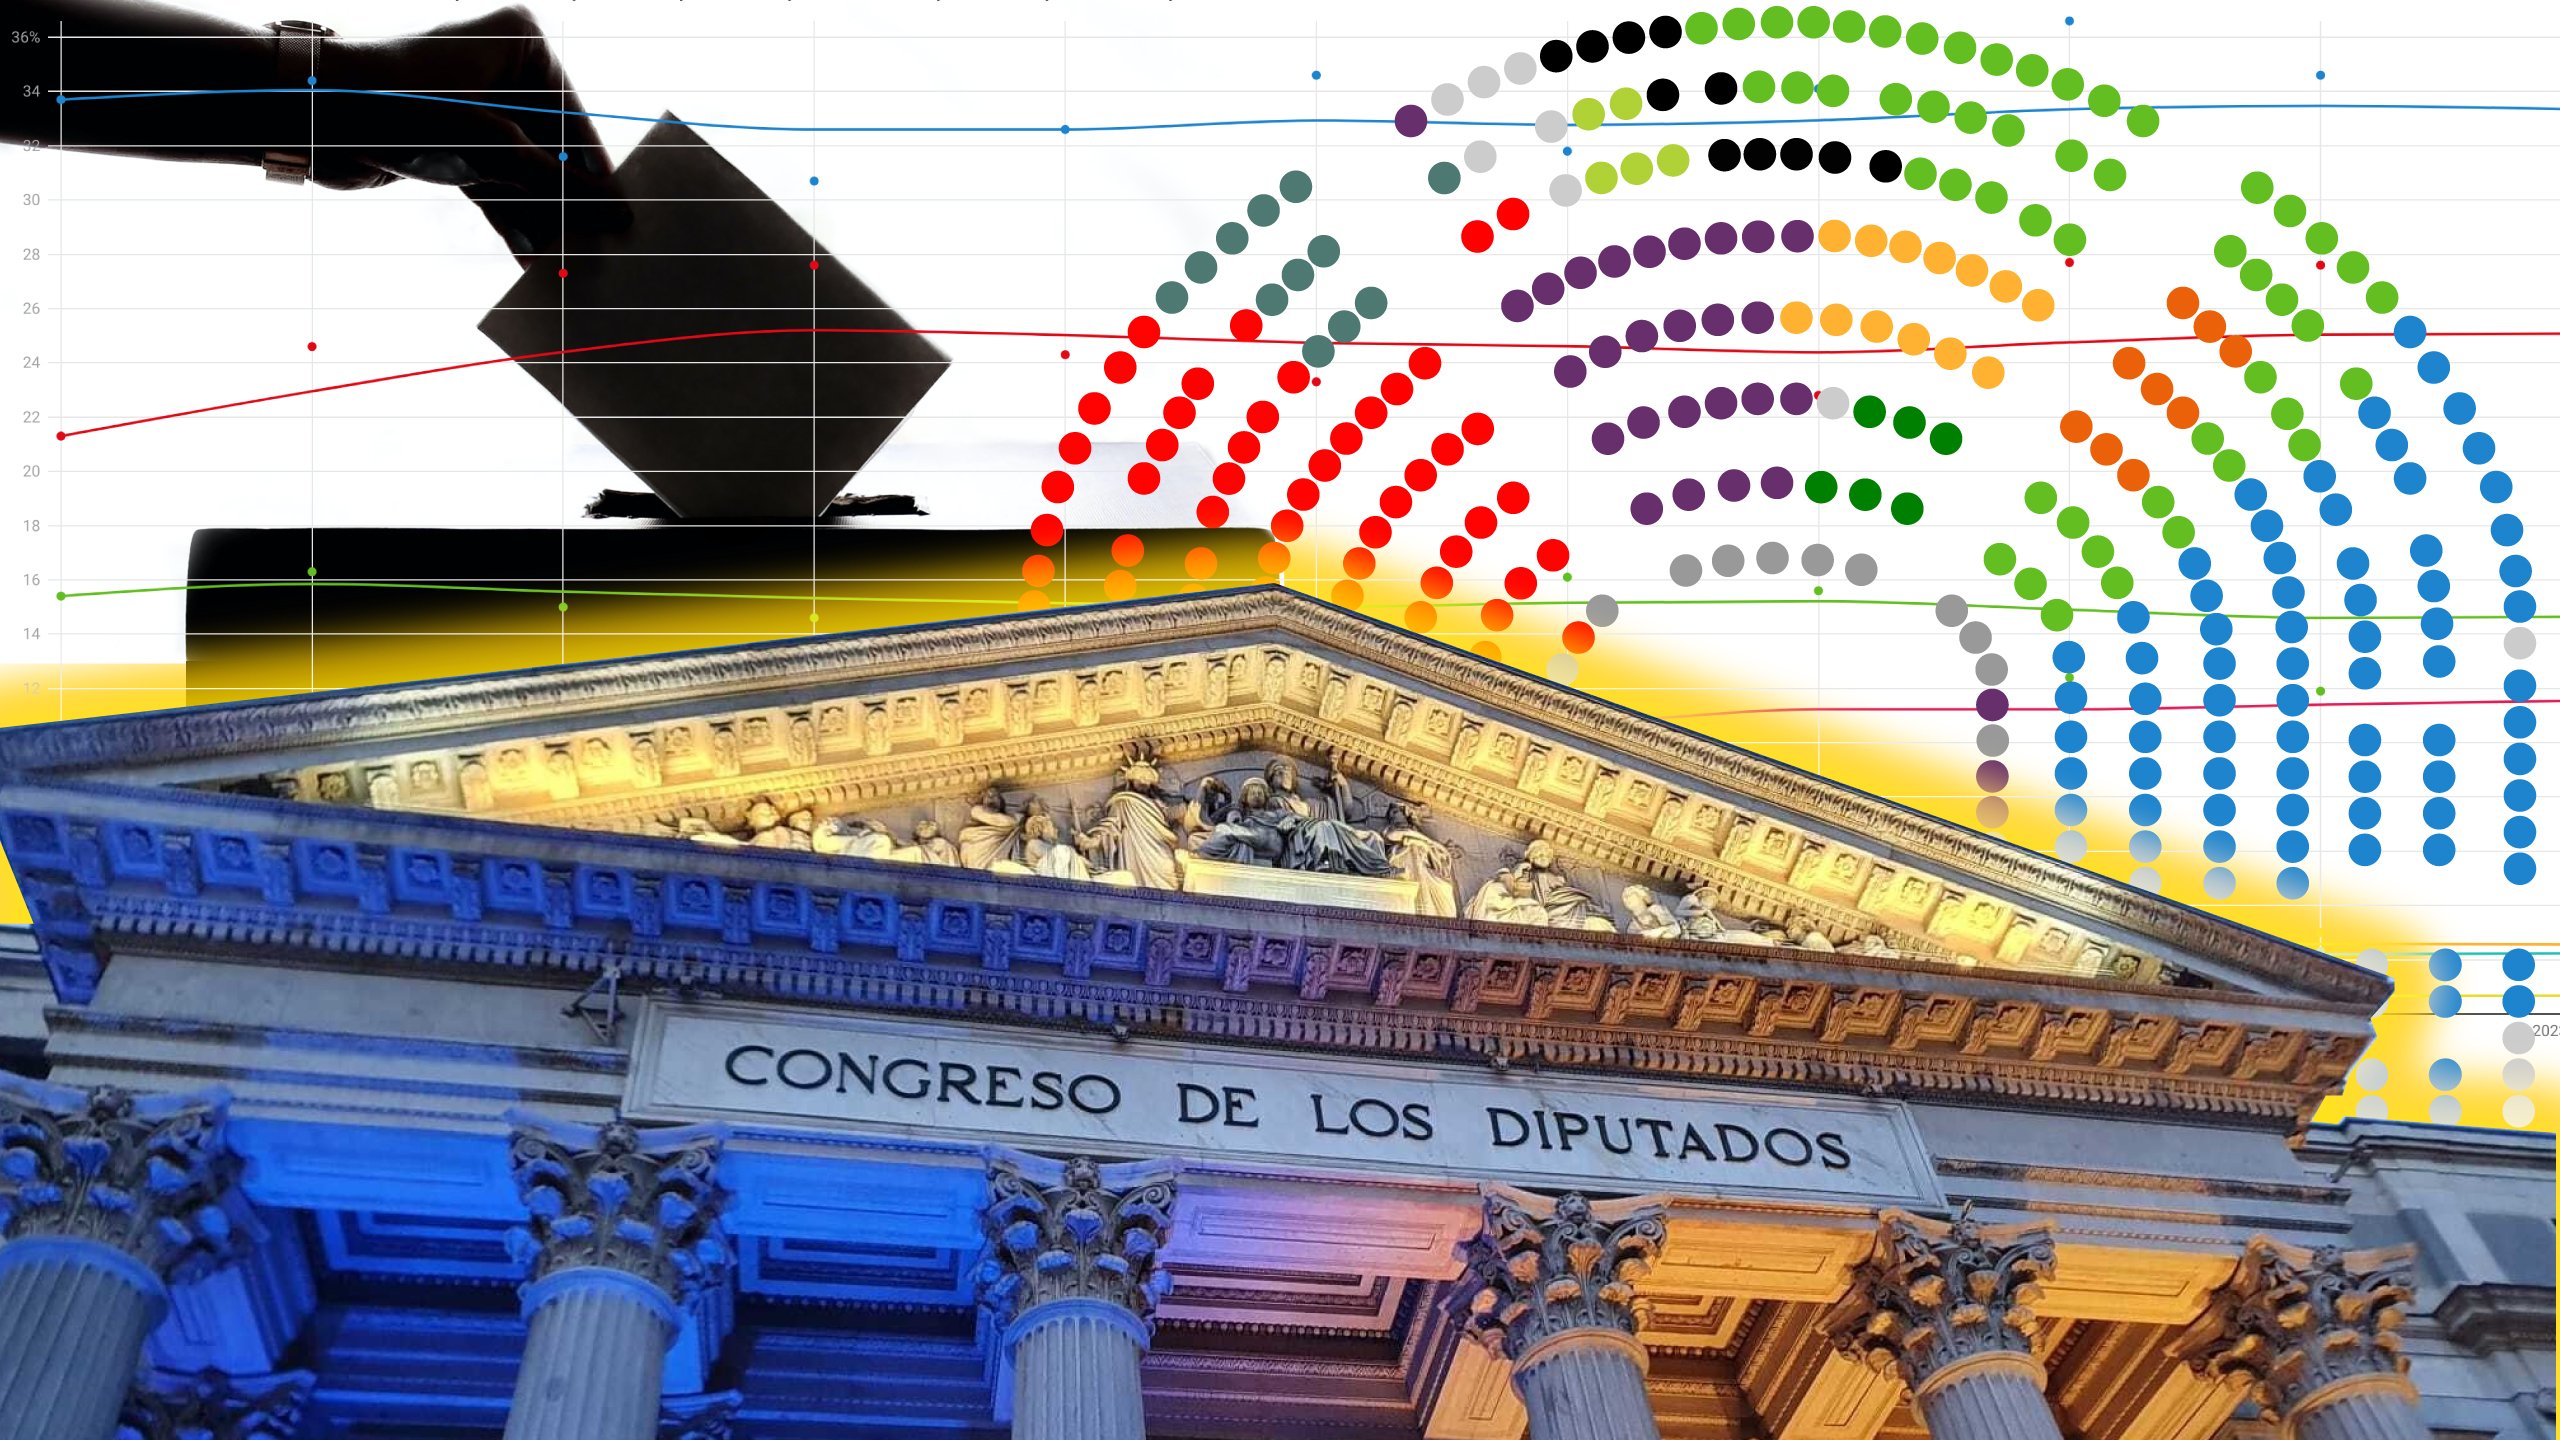 Spain's 23rd July election: what are the latest predictions? Here's our poll of polls